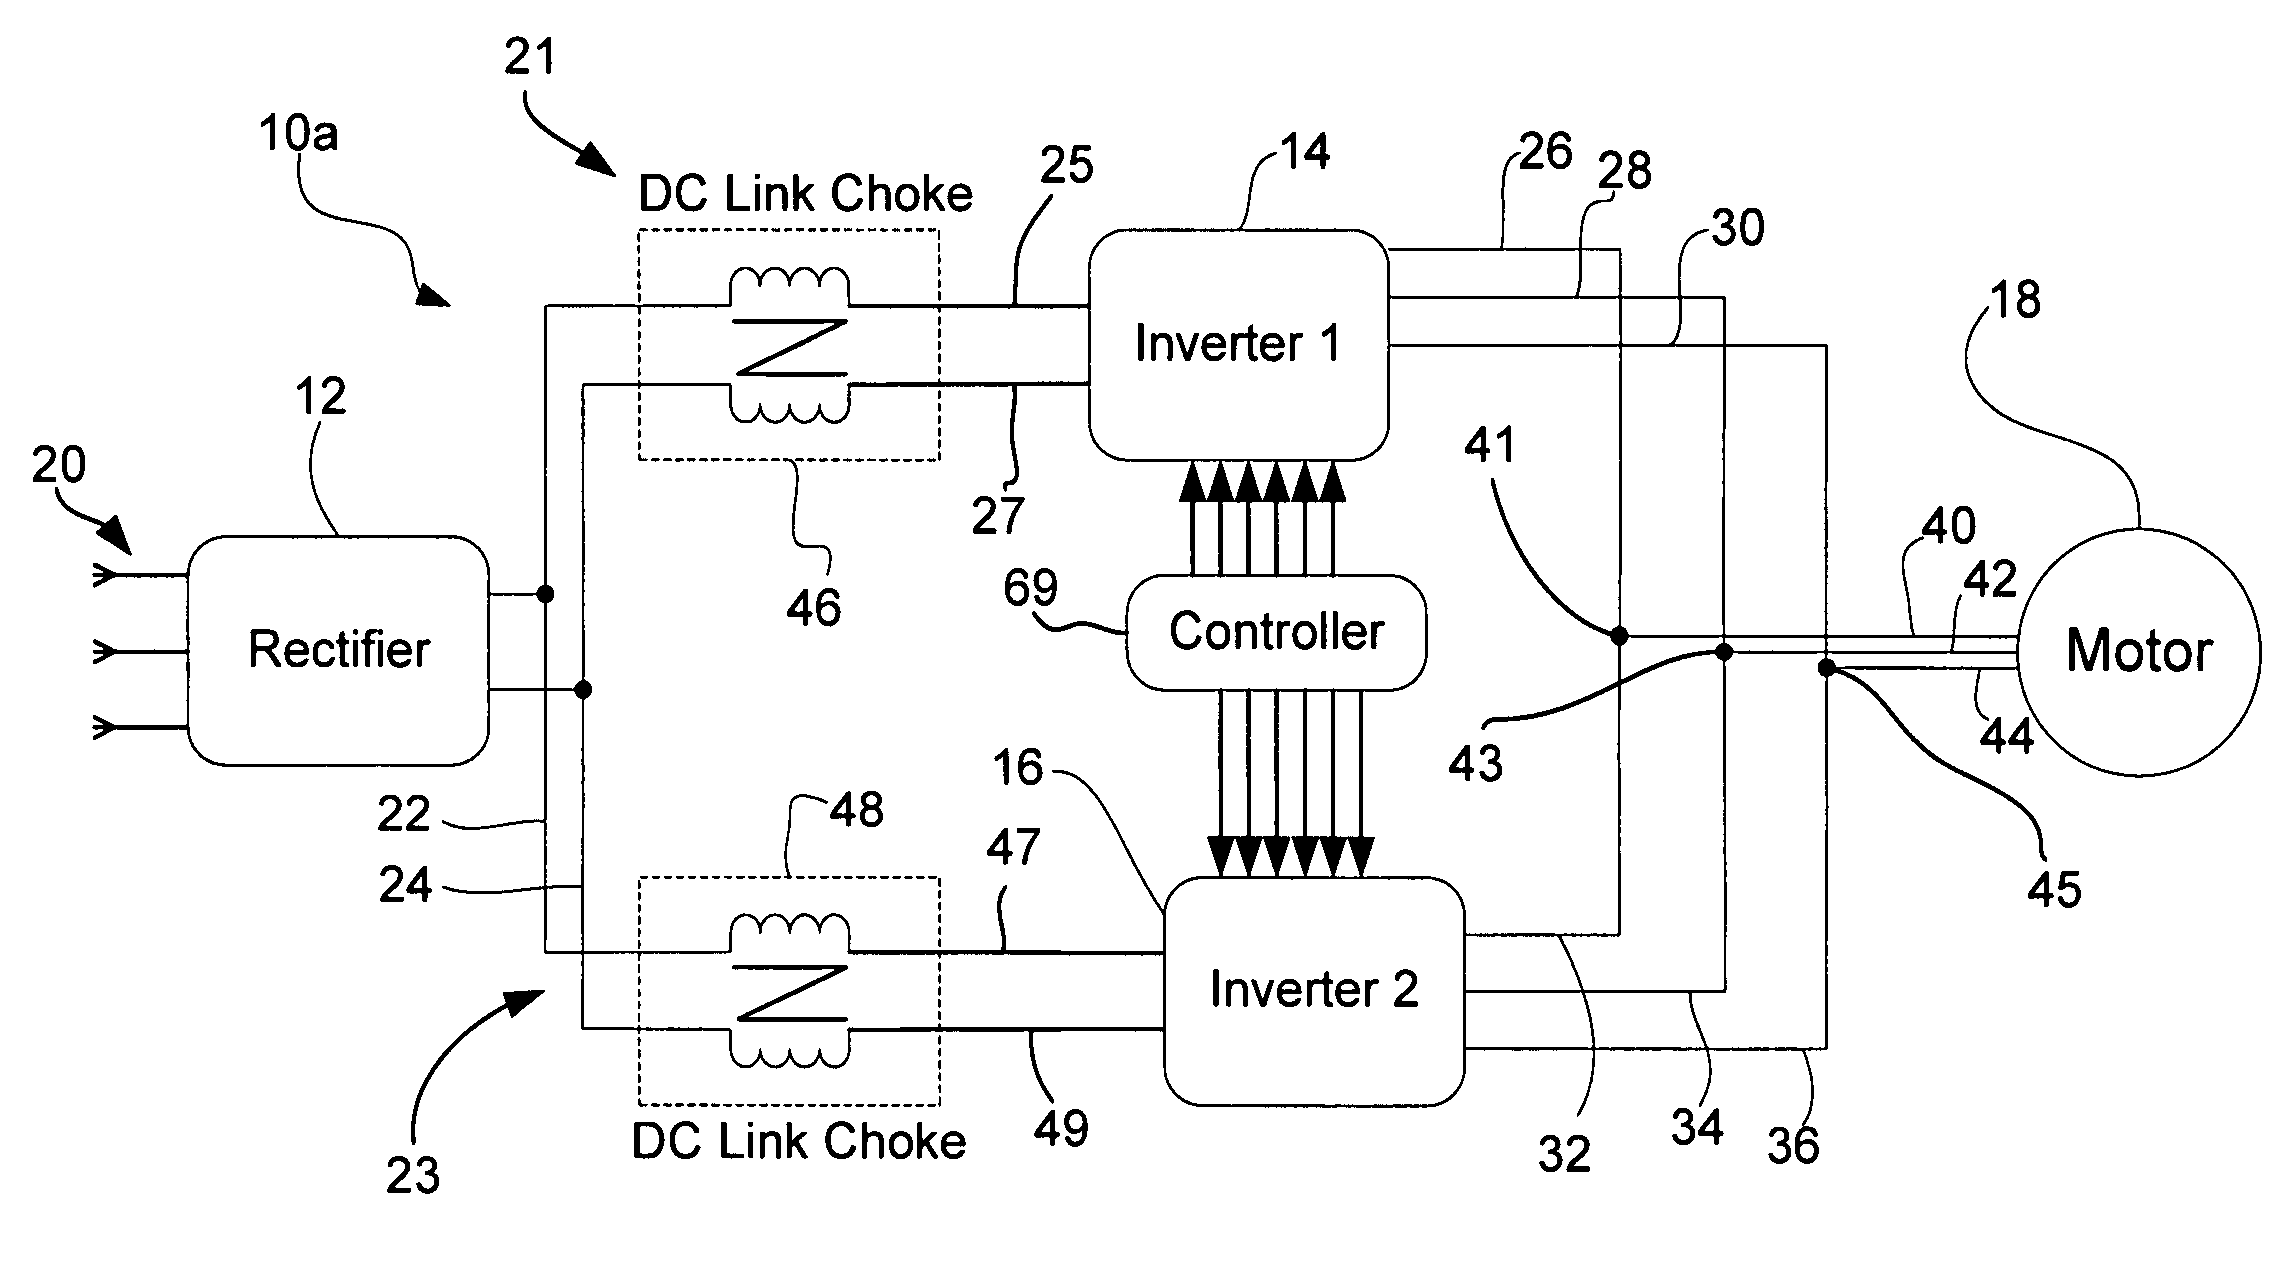 Method and apparatus for synchronized parallel operation of PWM inverters with limited circulating current